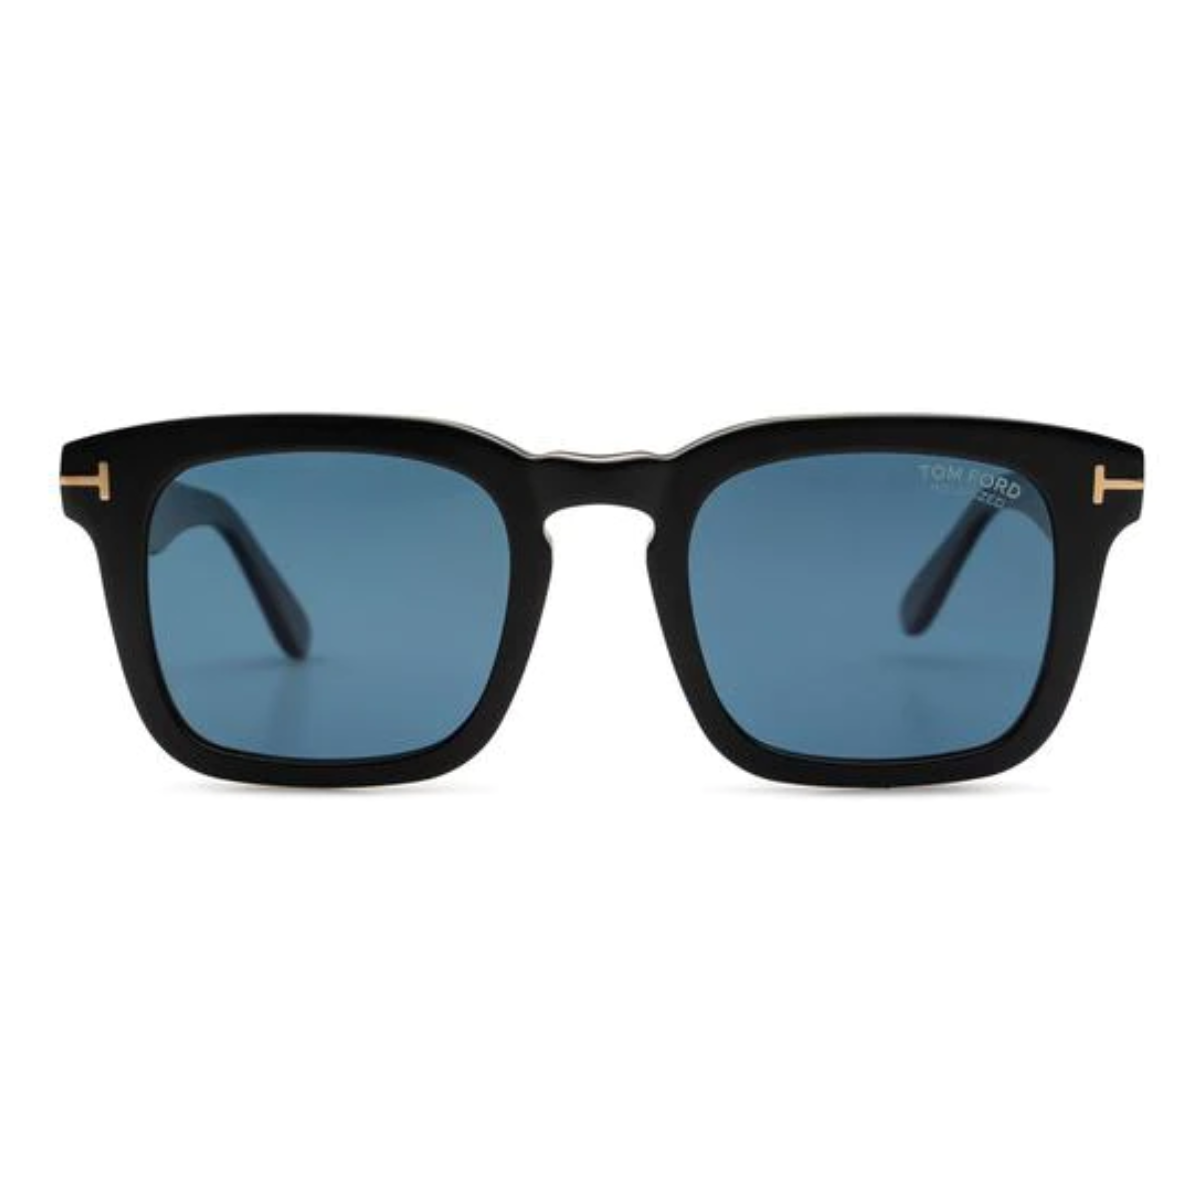 : "Tom Ford 751 unisex sunglasses displayed, featuring square-shaped frames in acetate and polycarbonate lenses, available in light green and light blue with Havana and black temple options, adding a stylish touch to any outfit."